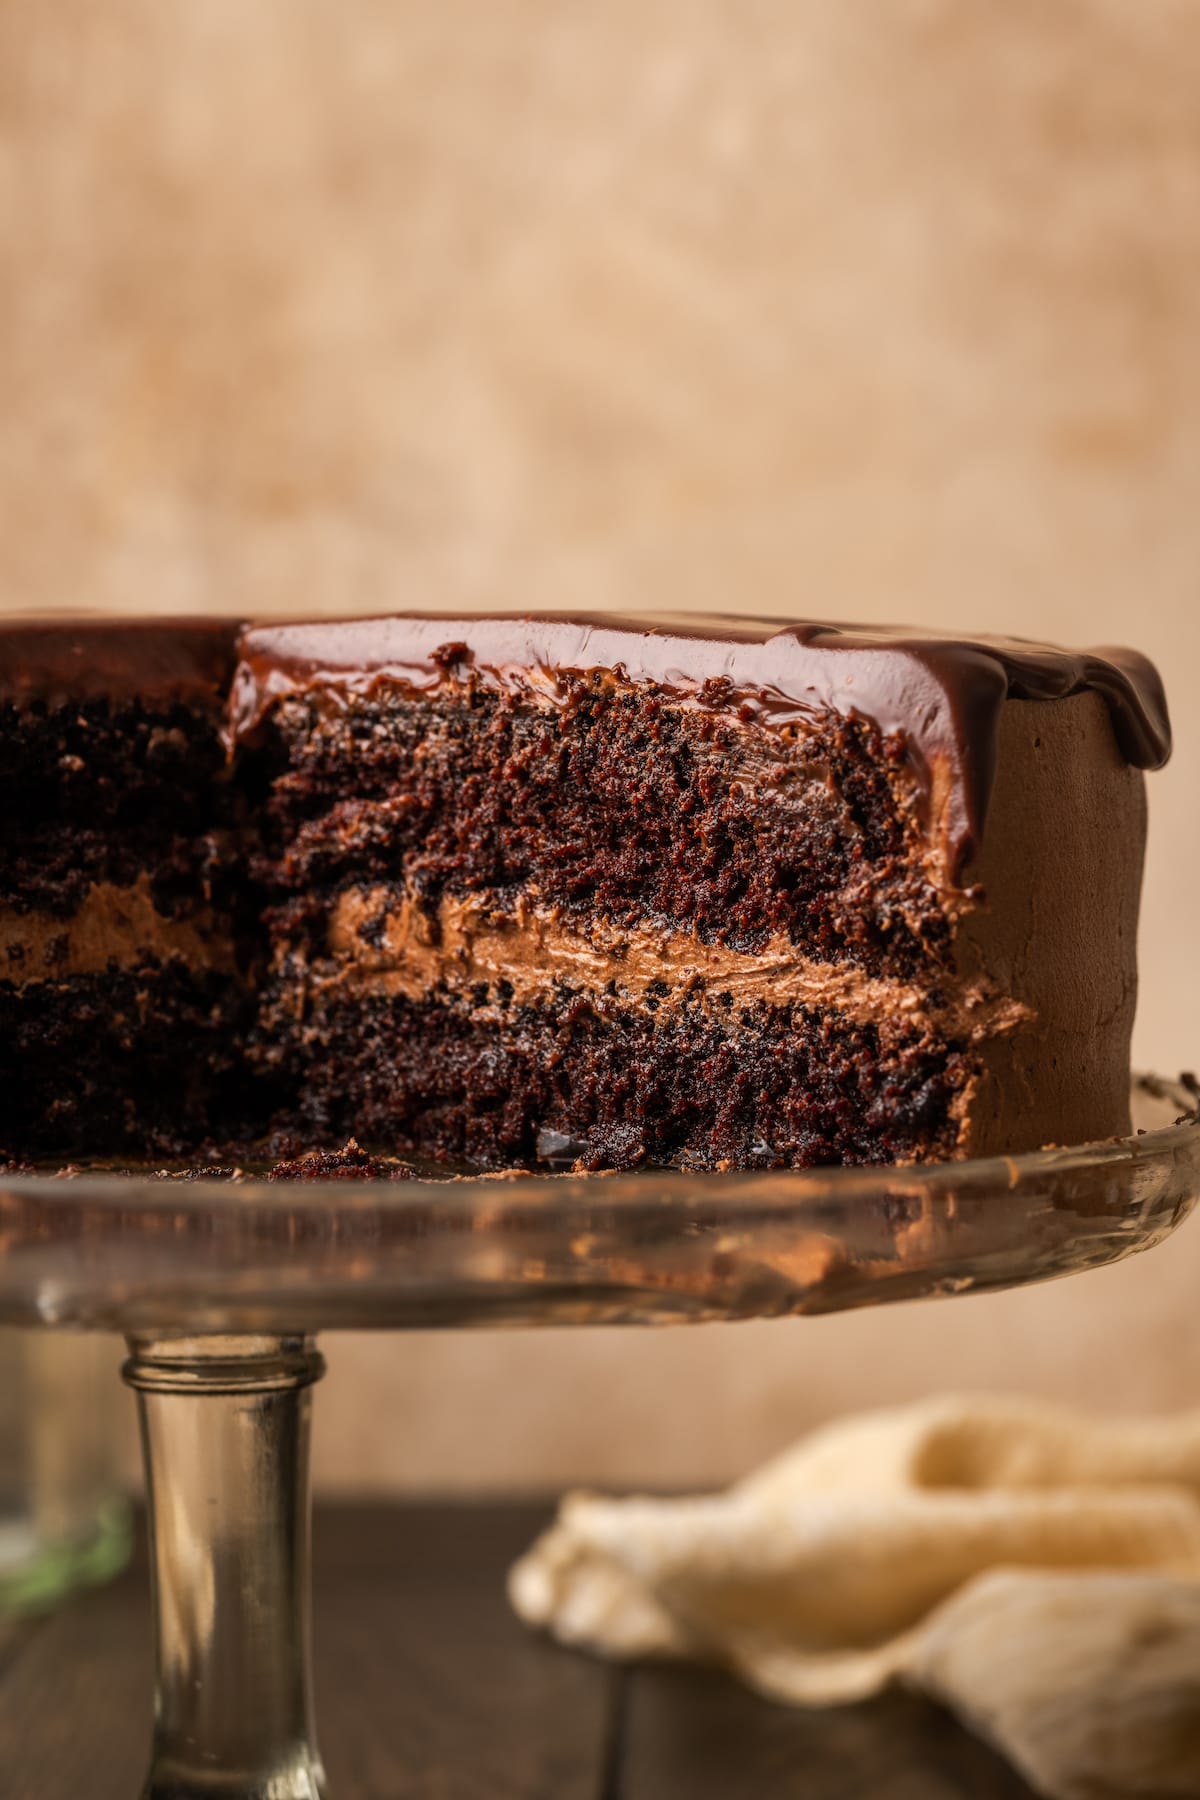 A frosted chocolate layer cake topped with chocolate ganache on a cake stand, with a large slice of cake missing.